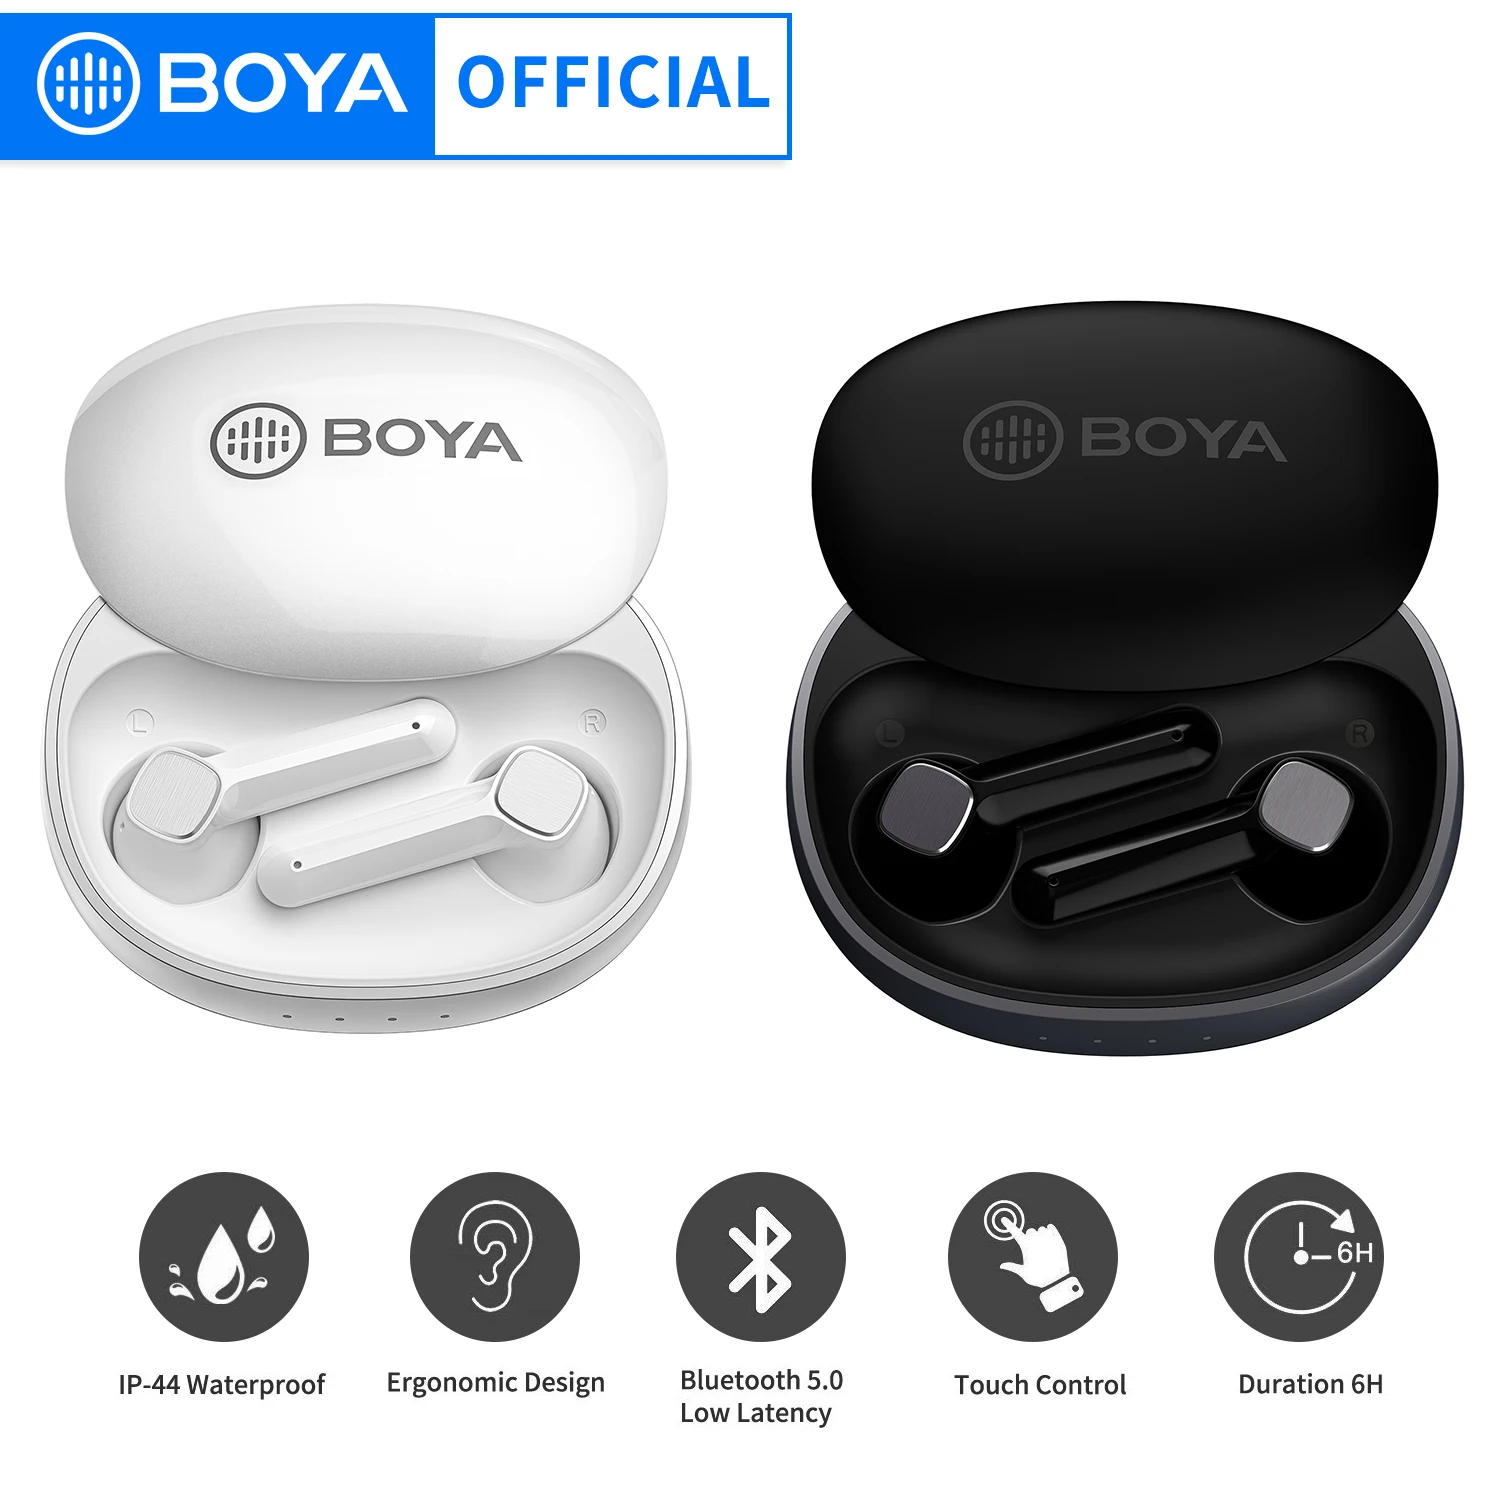 

BOYA BY-AP100 True Wireless Stereo Earbuds 5.1 Bluetooth 6H Playtime for Gaming Video Watching AAC/SBC High Quality Sound